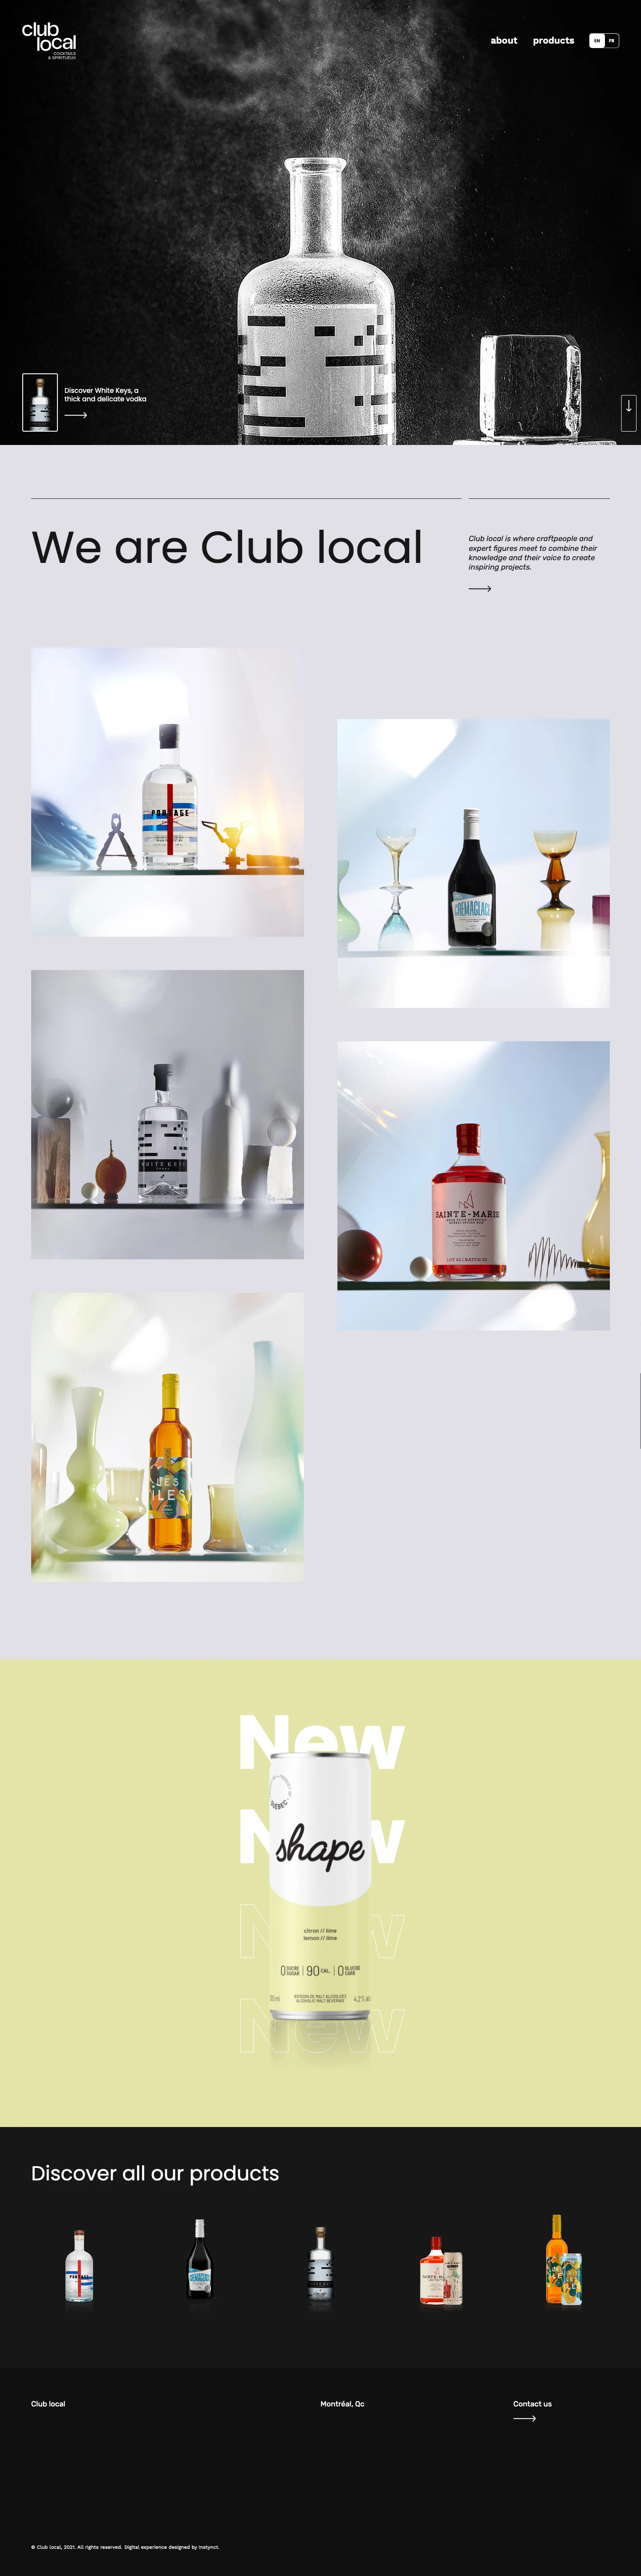 Club local Landing Page Example: Creator of these popular spirits in Quebec: Crèmaglace, Les Îles aperitif, Sainte-Marie Rum, Portage Dry Gin, and White Keys Vodka.